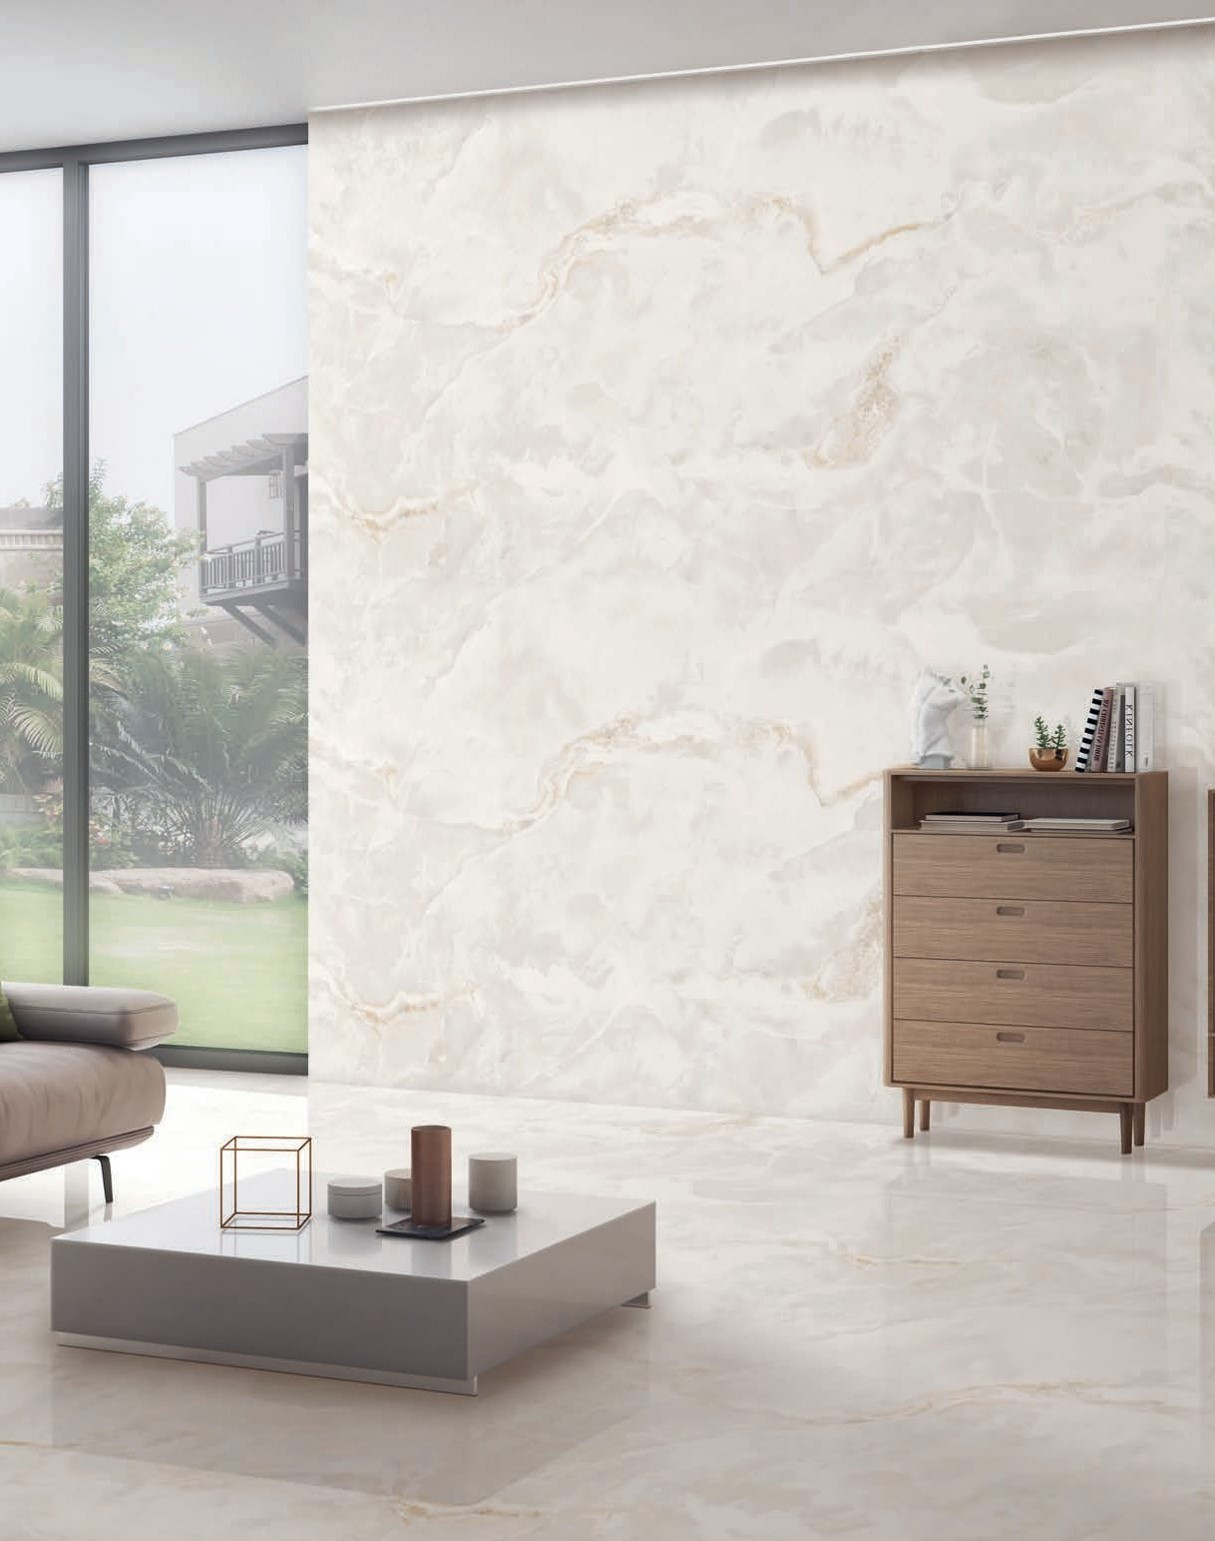 Polished porcelain stoneware floor with White Onyx marble effect by Bertolani Vena Continua
